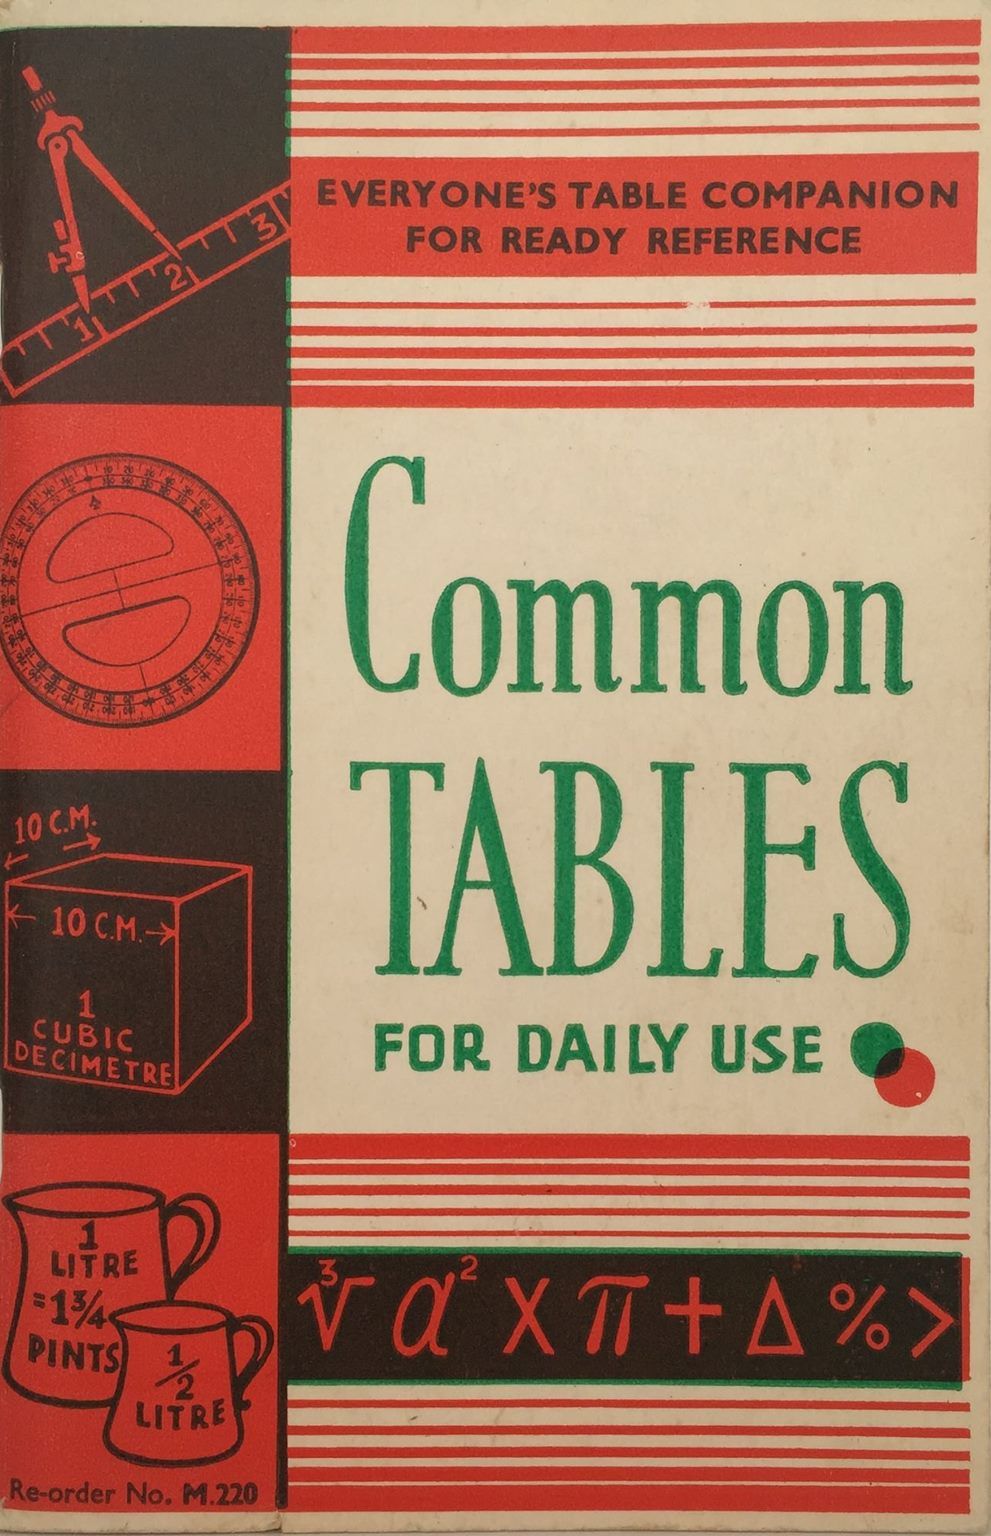 COMMON TABLES FOR DAILY USE: Everyone's Table Companion for Ready Reference